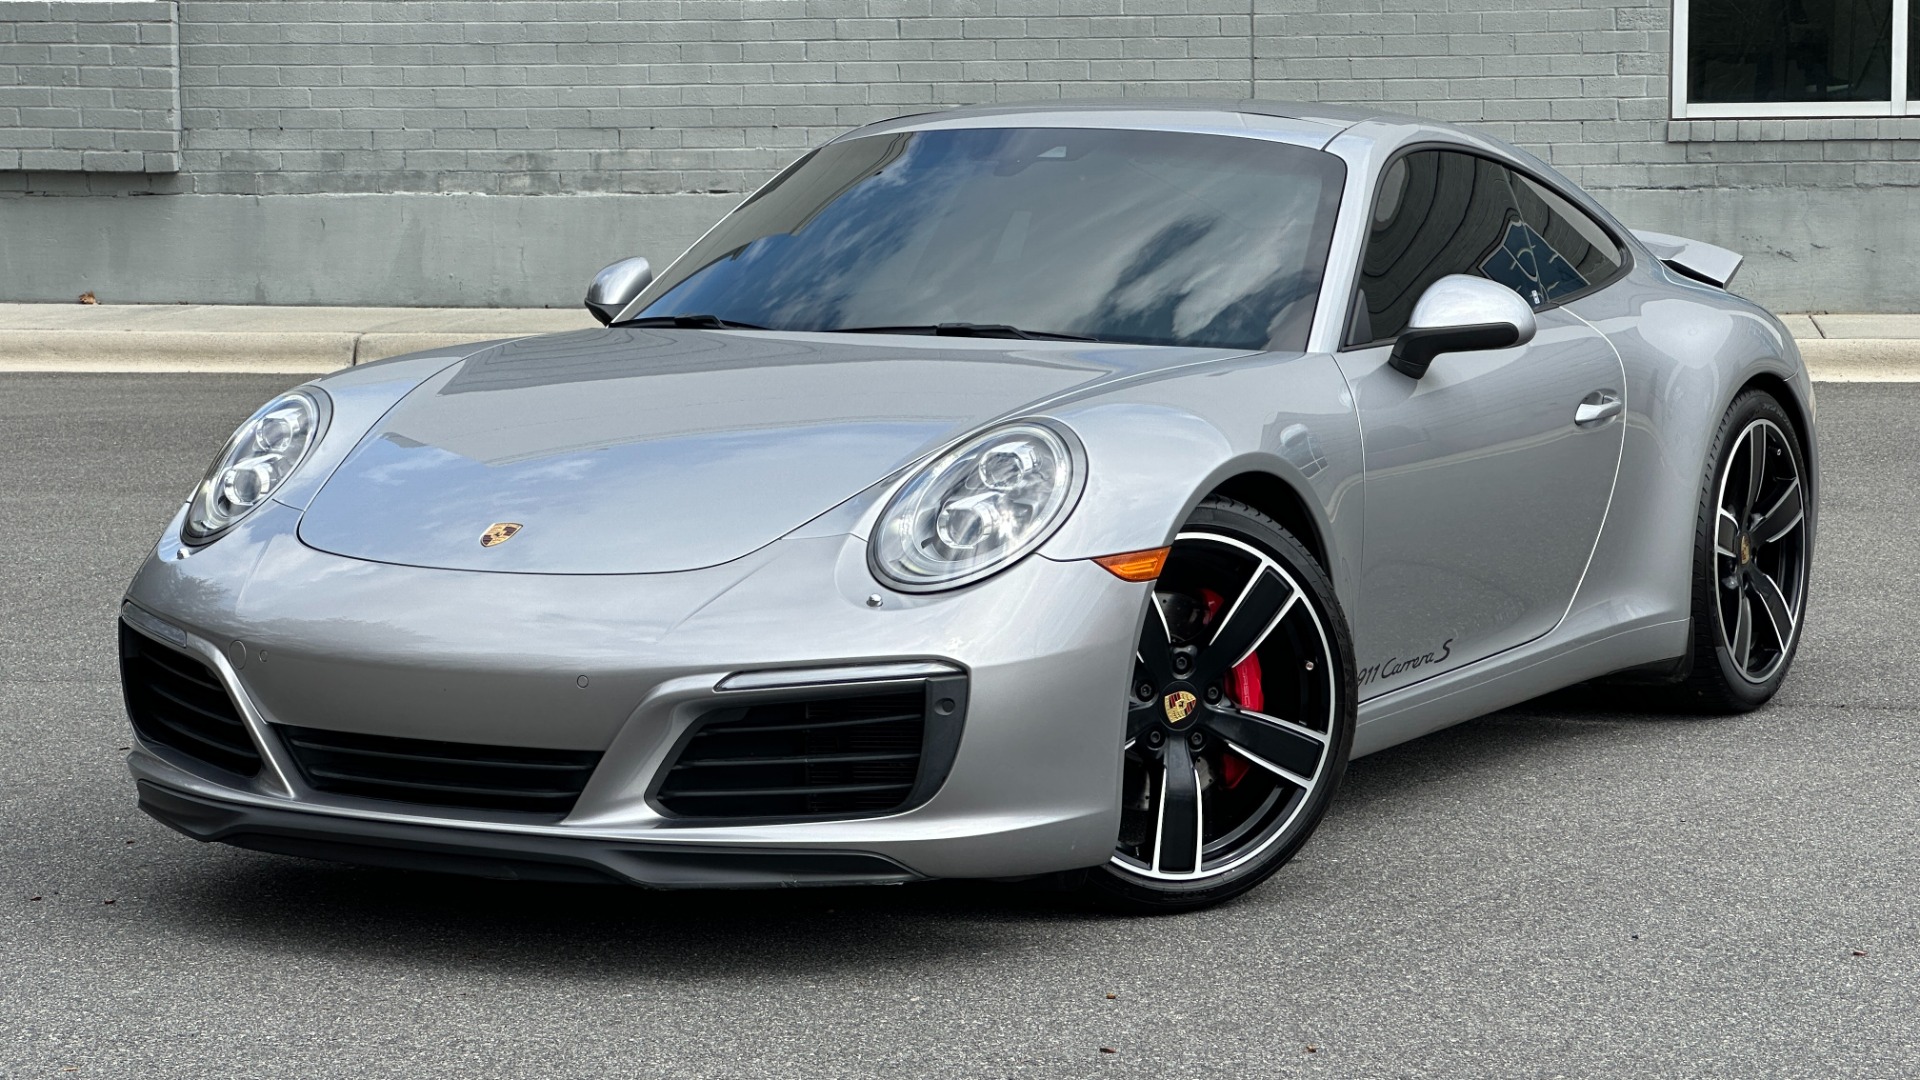 Used 2017 Porsche 911 CARRERA S / PDK / SPORT PLUS INTERIOR / SPORT EXHAUST / PASM SUSPENSION for sale Sold at Formula Imports in Charlotte NC 28227 1